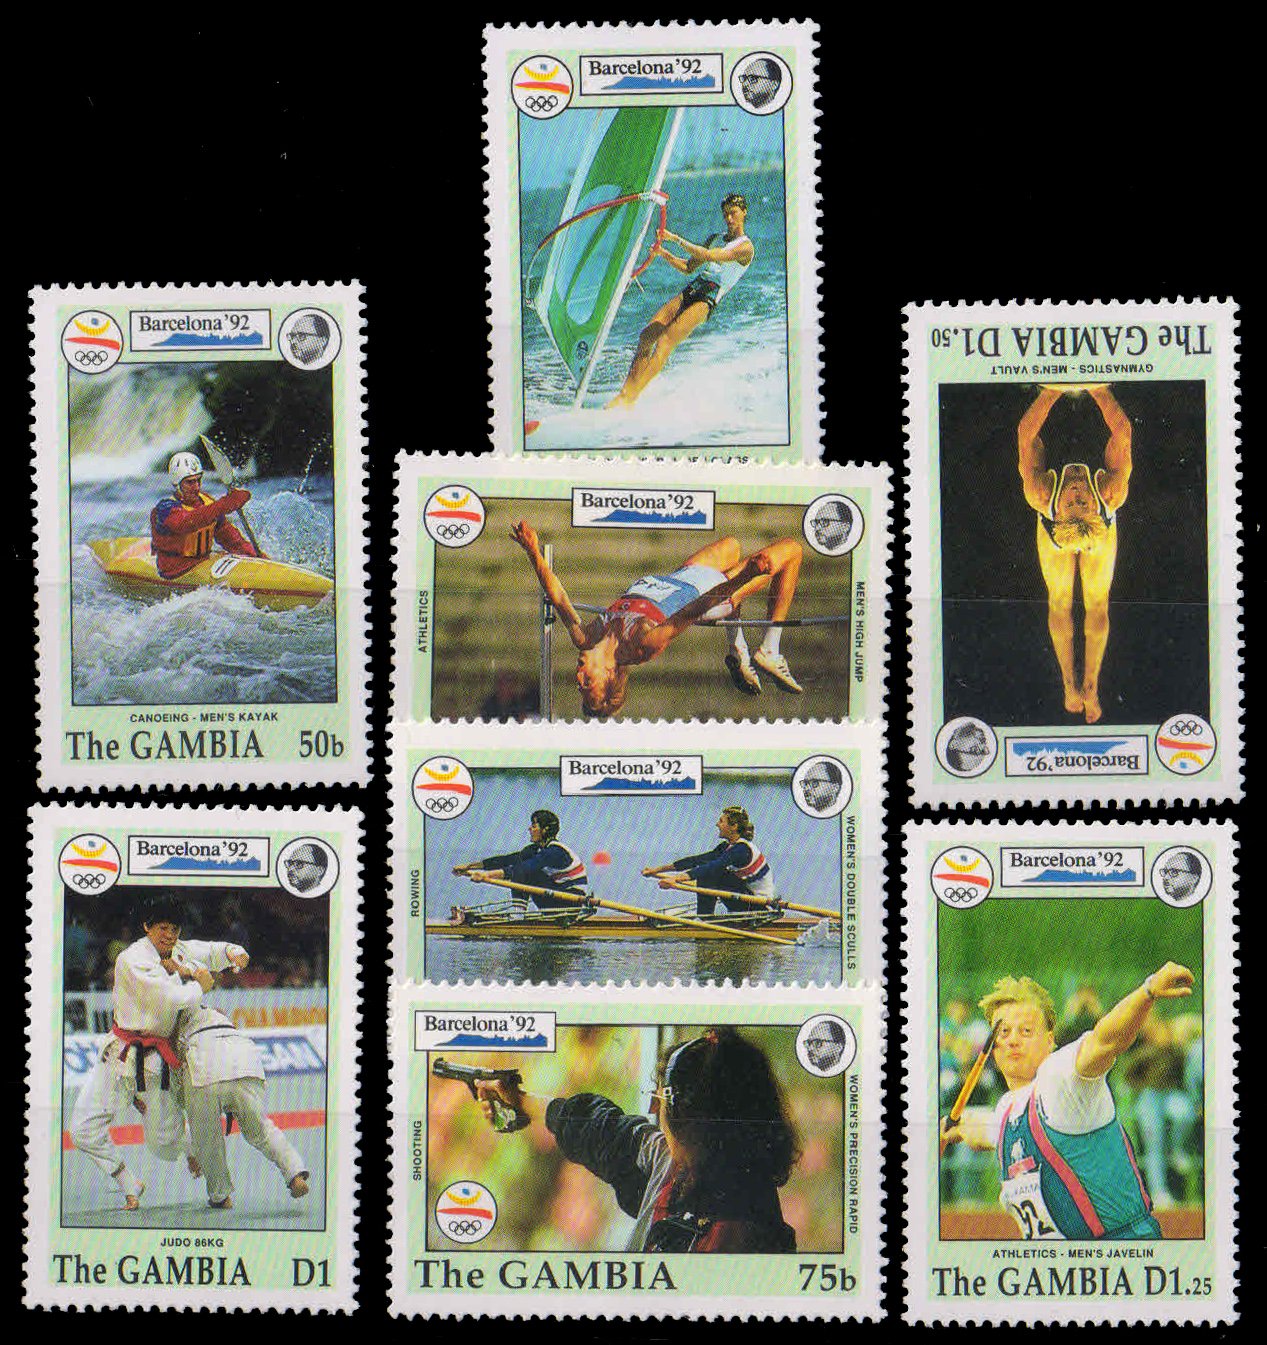 GAMBIA 1992-Barcelona Olympic Games, Set of 7, MNH, S.G. 1351-59